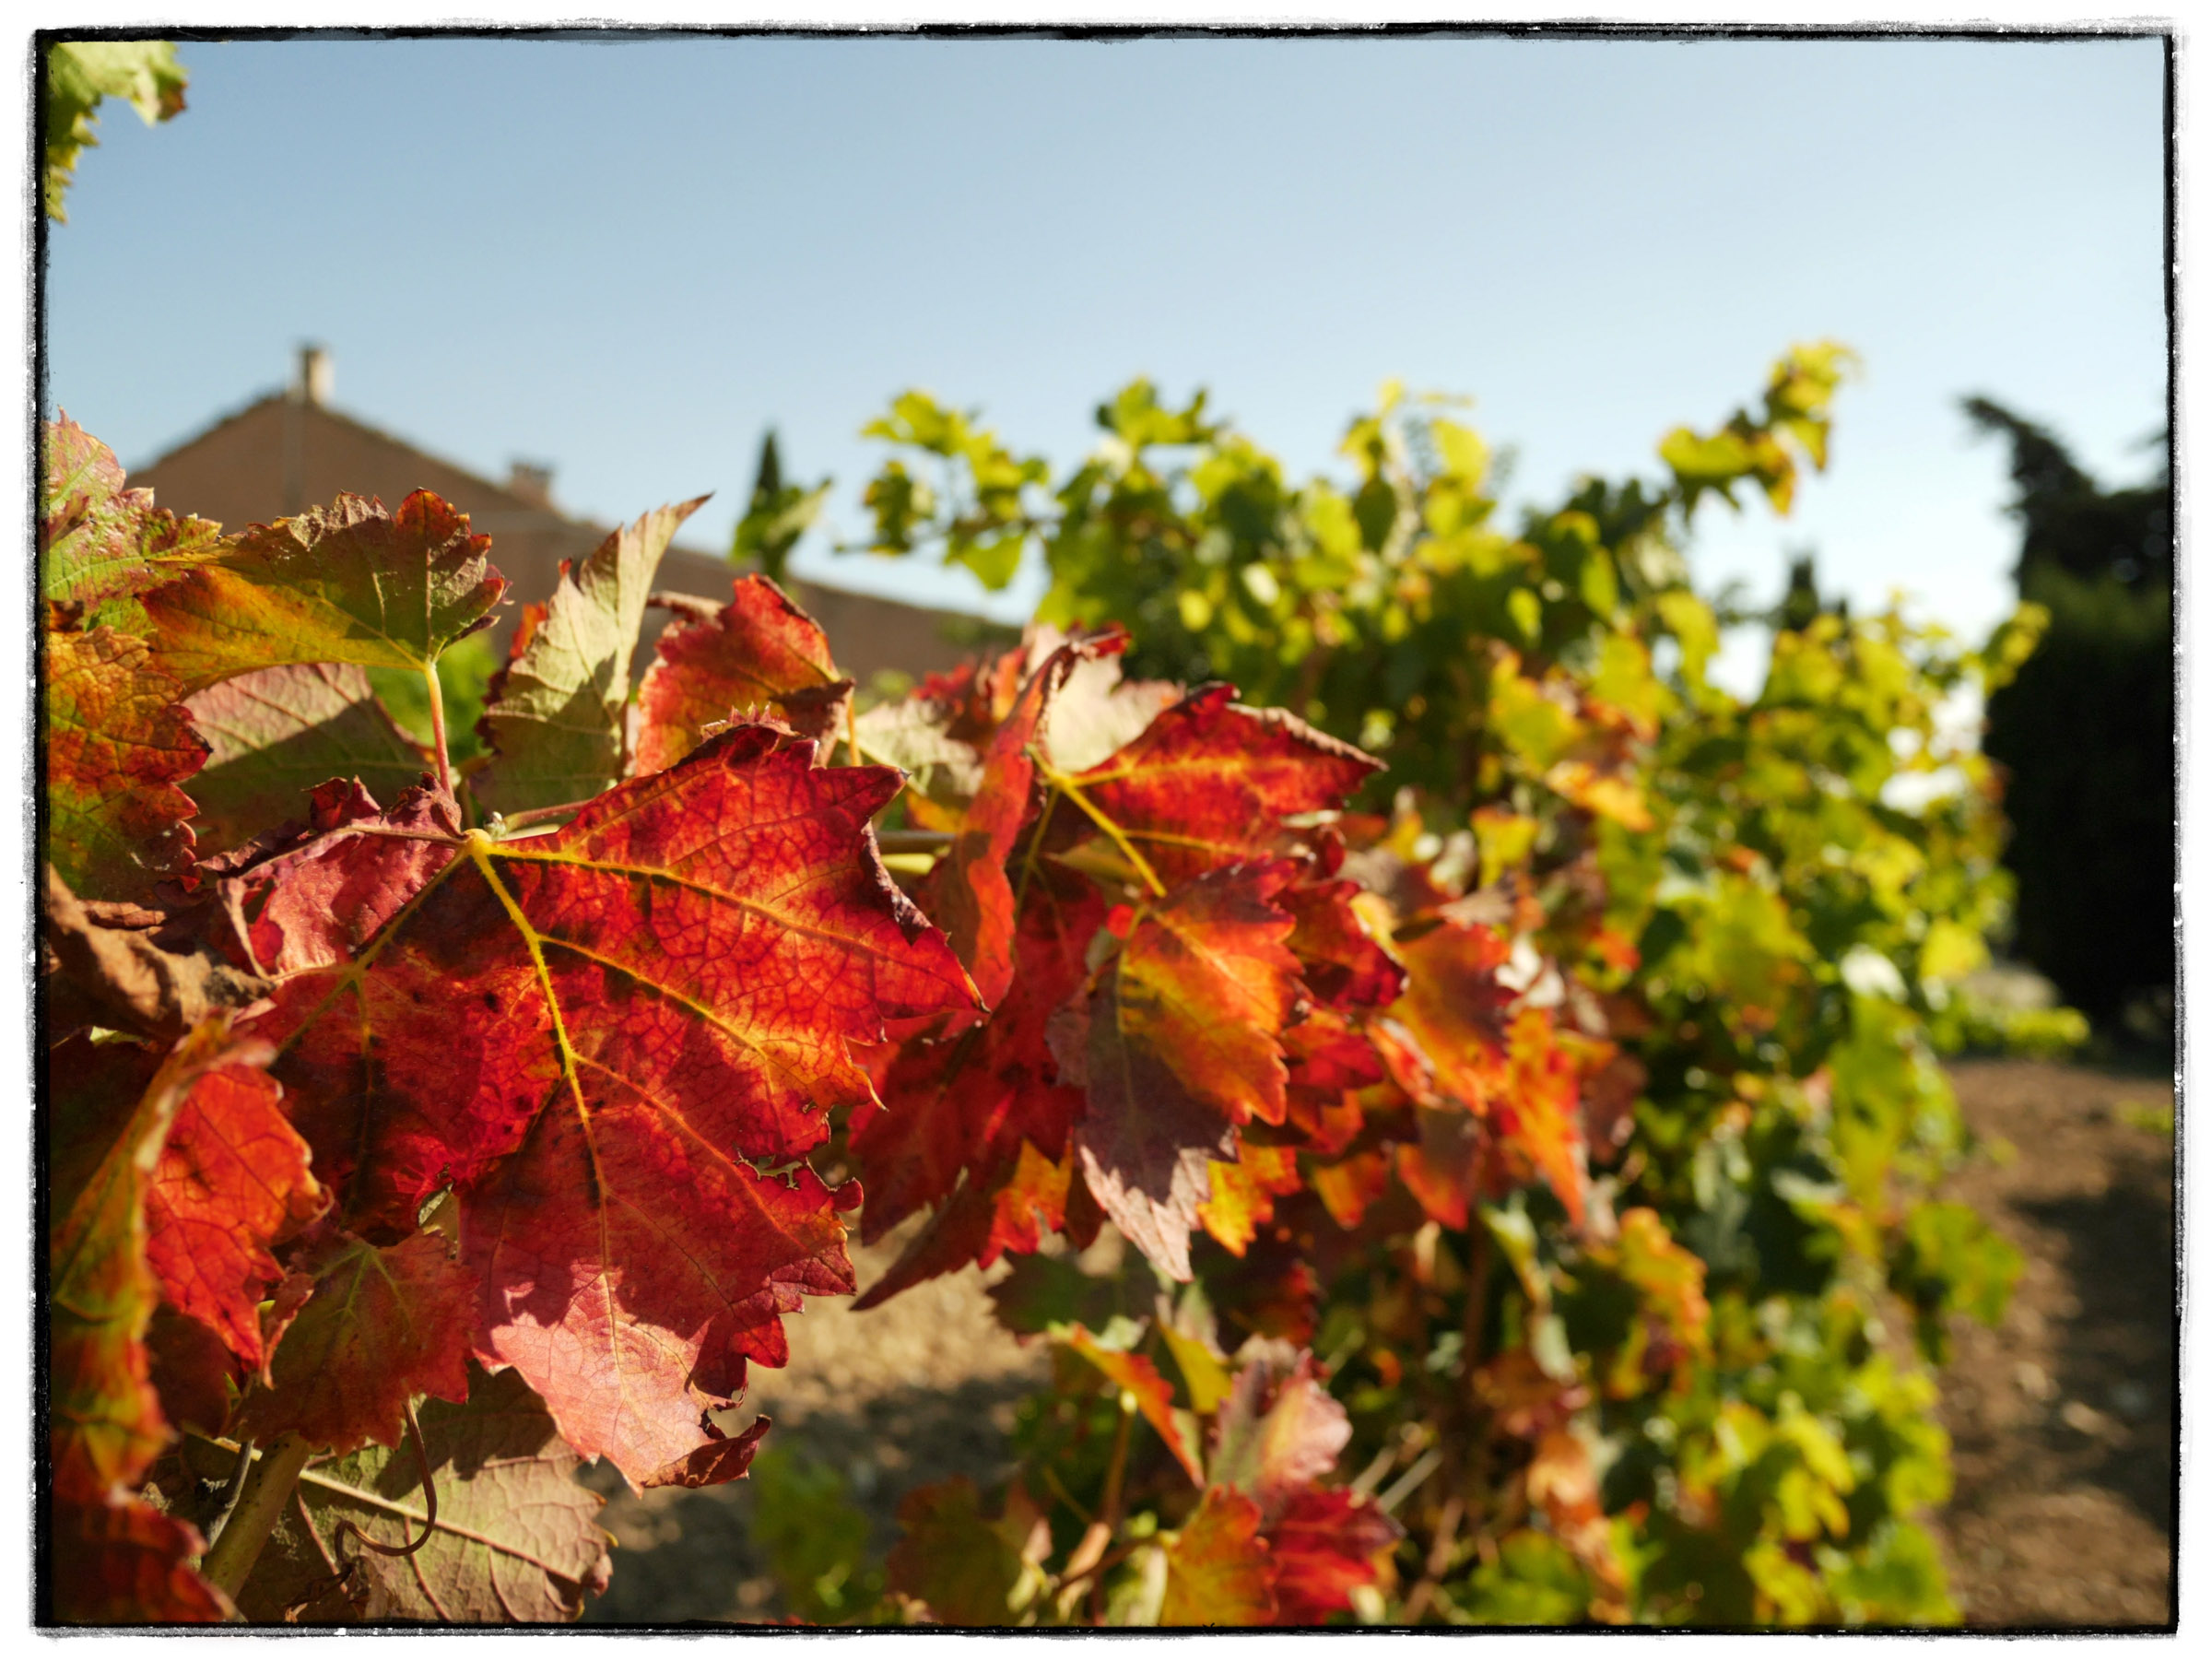 Harvest time in the vines